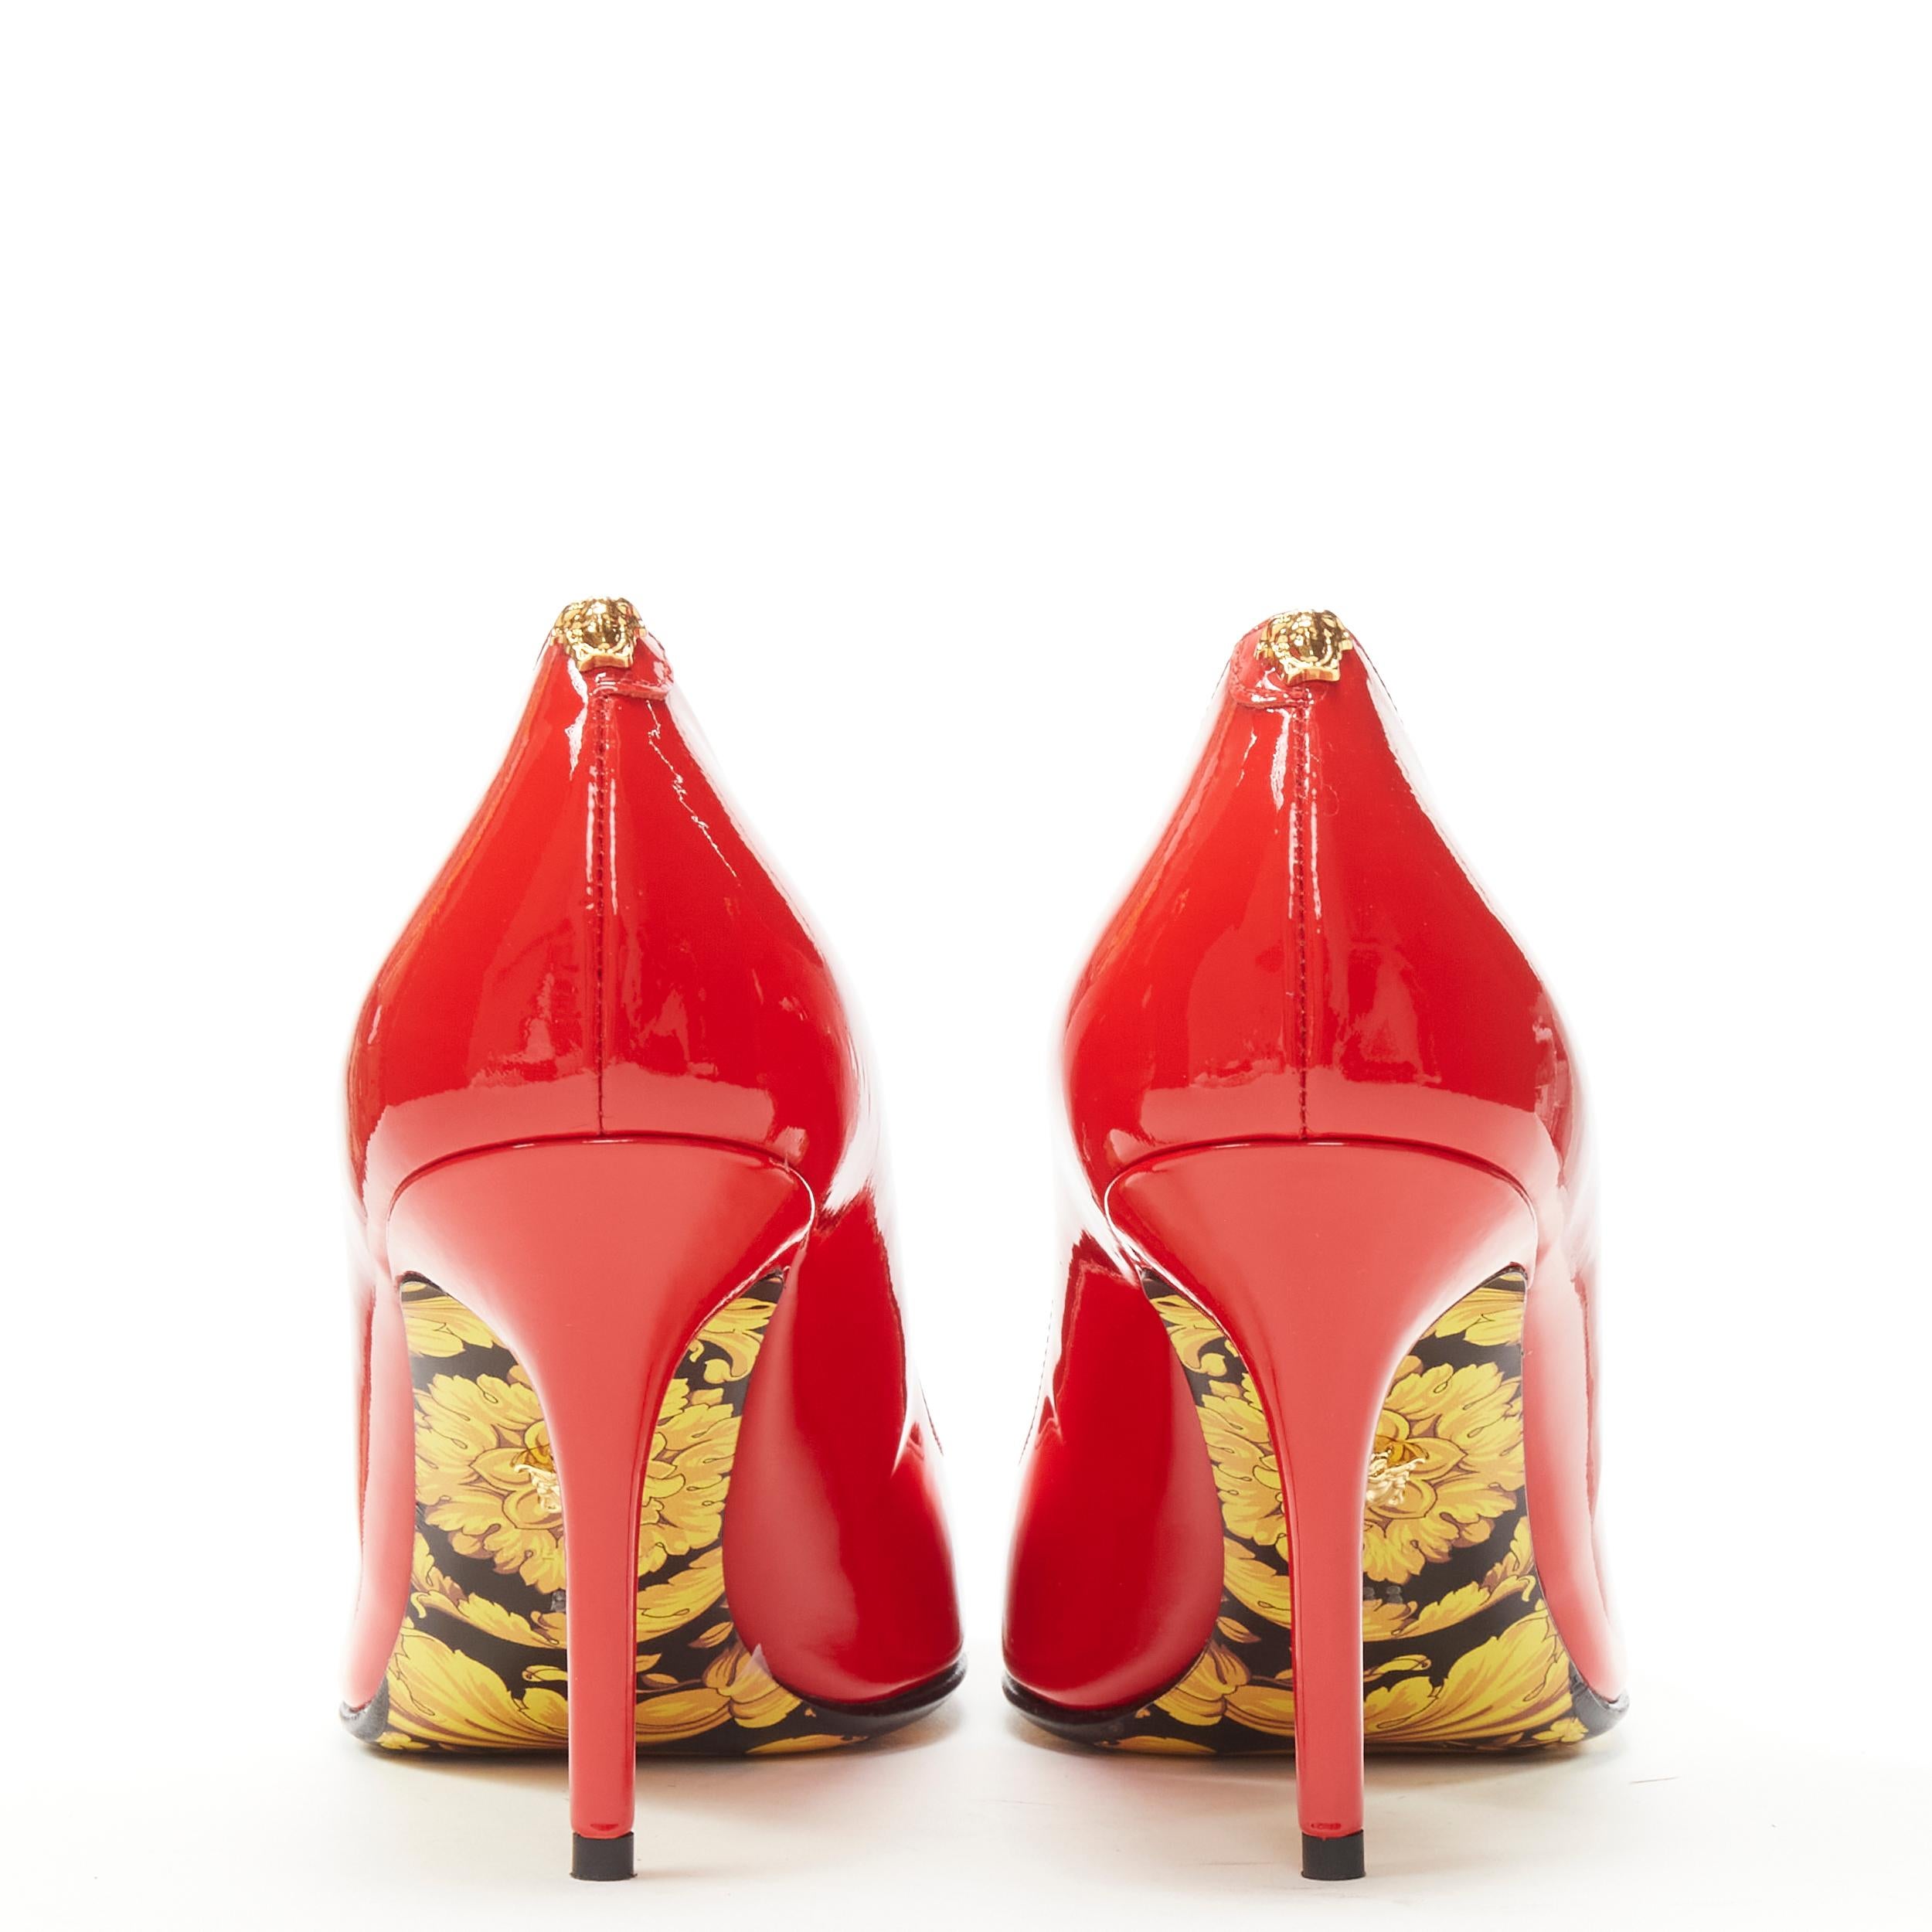 new VERSACE Hibiscus Barocco Eros red patent floral sole Medusa pump US8 EU38
Brand: Versace
Designer: Donatella Versace
Model: DST037M DVE21 K5NOH
Collection: Hibiscus Barocco 
Material: Patent Leather
Color: Red
Pattern: Solid
Extra Detail: